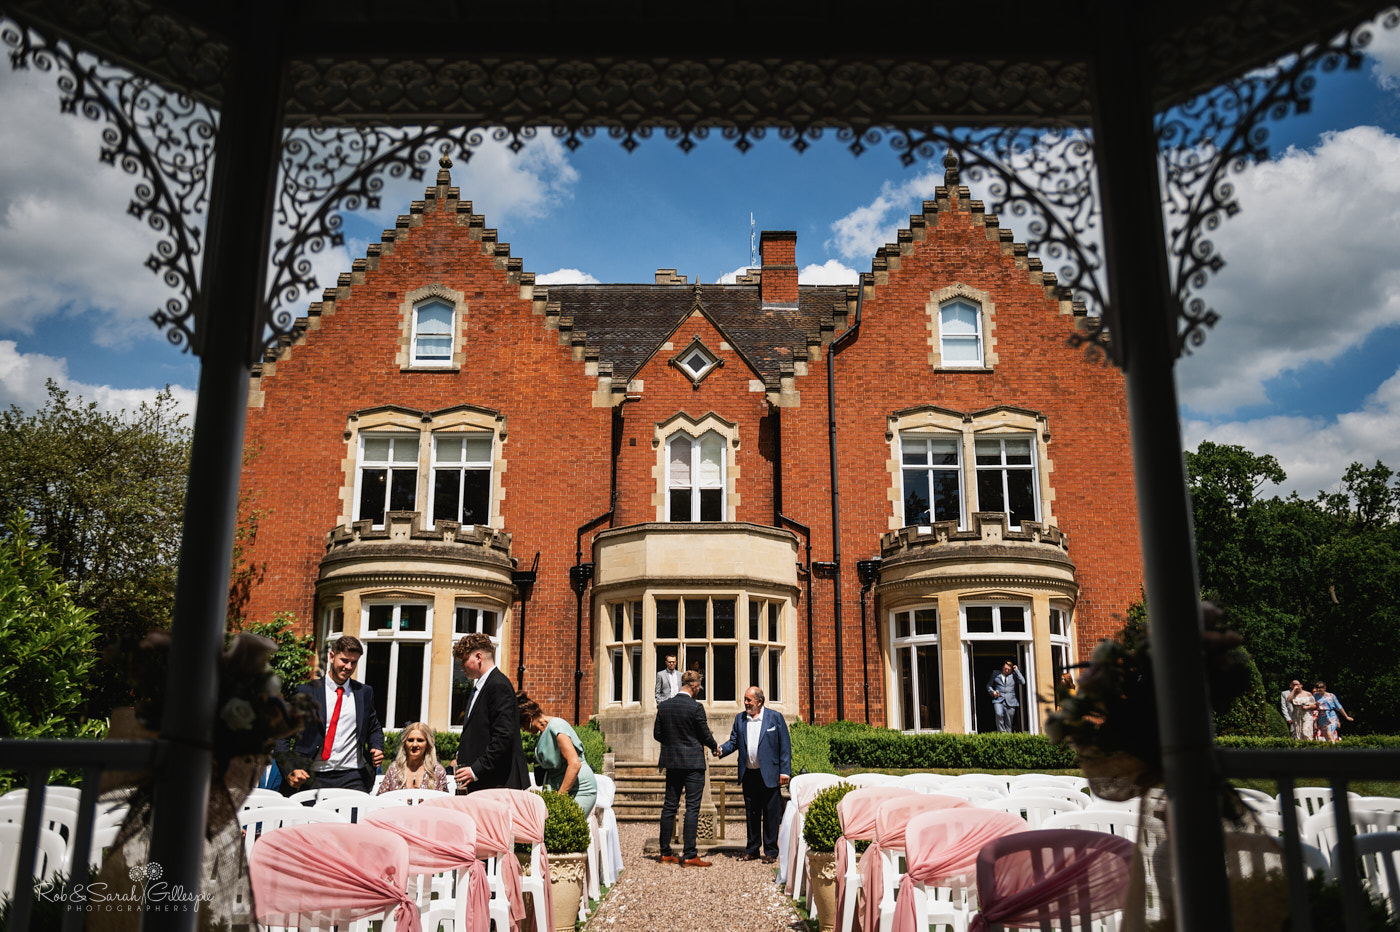 Guests arrive for outdoor wedding at Pendrell Hall